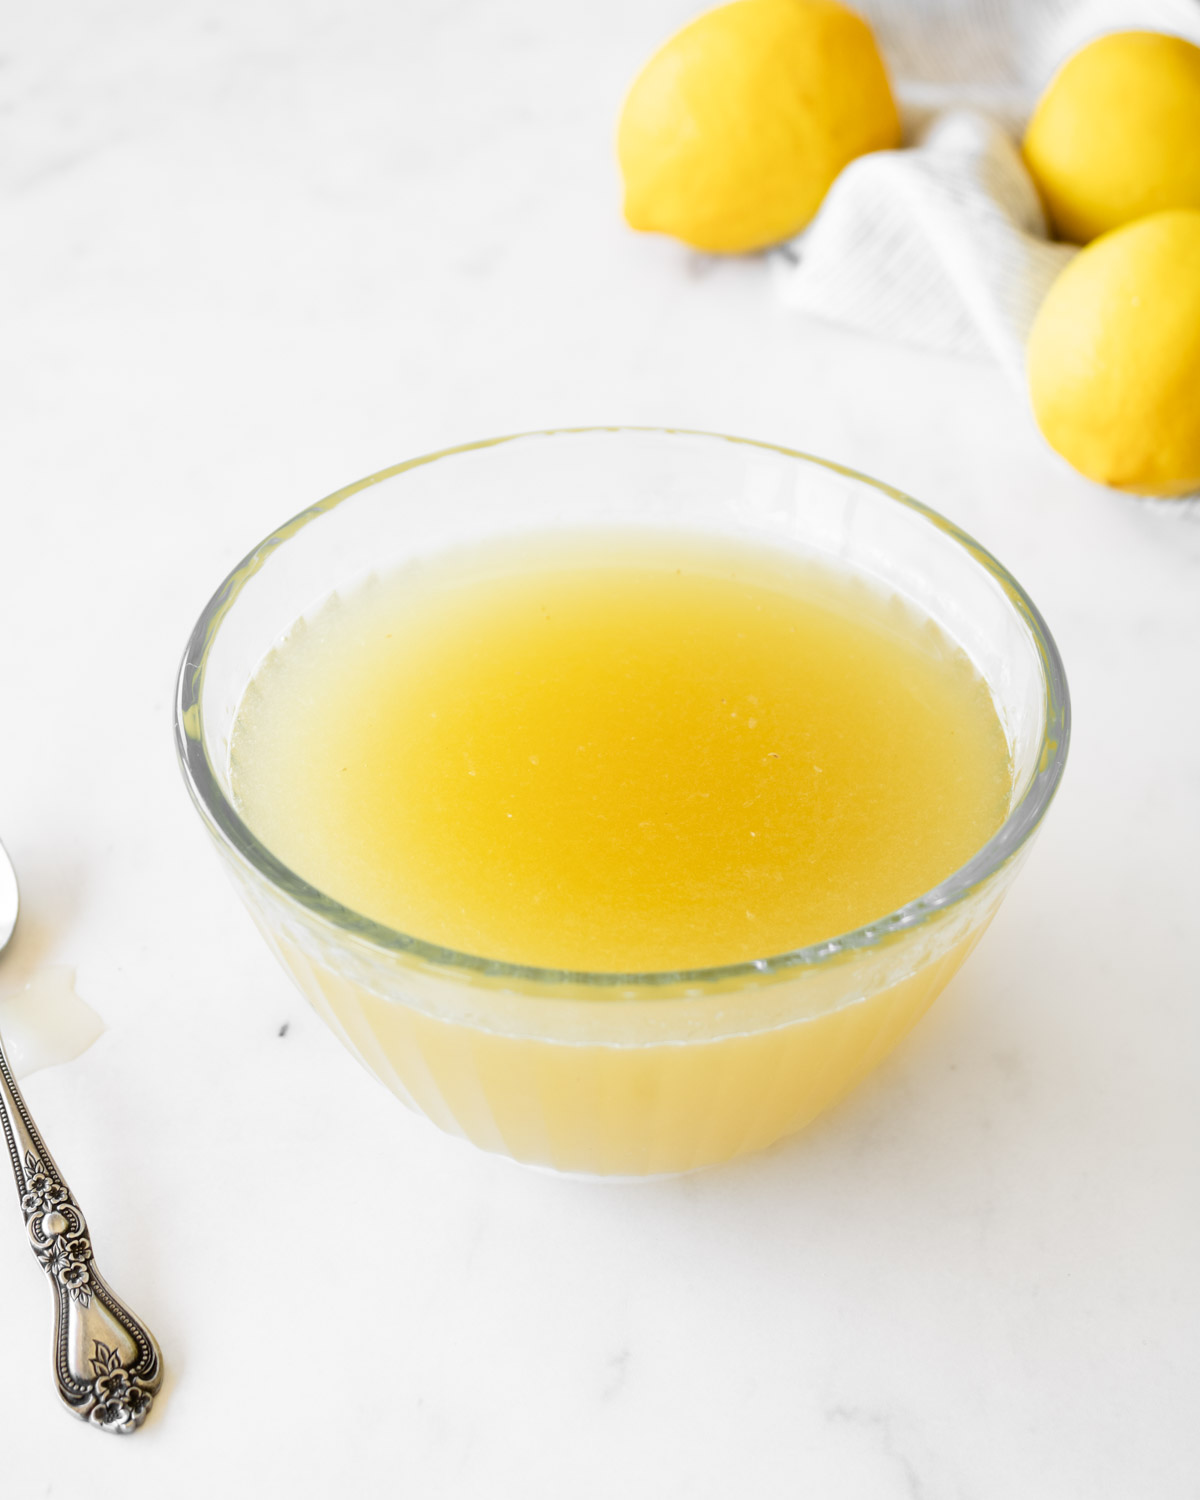 lemon sugar syrup in a glass bowl with lemons in the back.